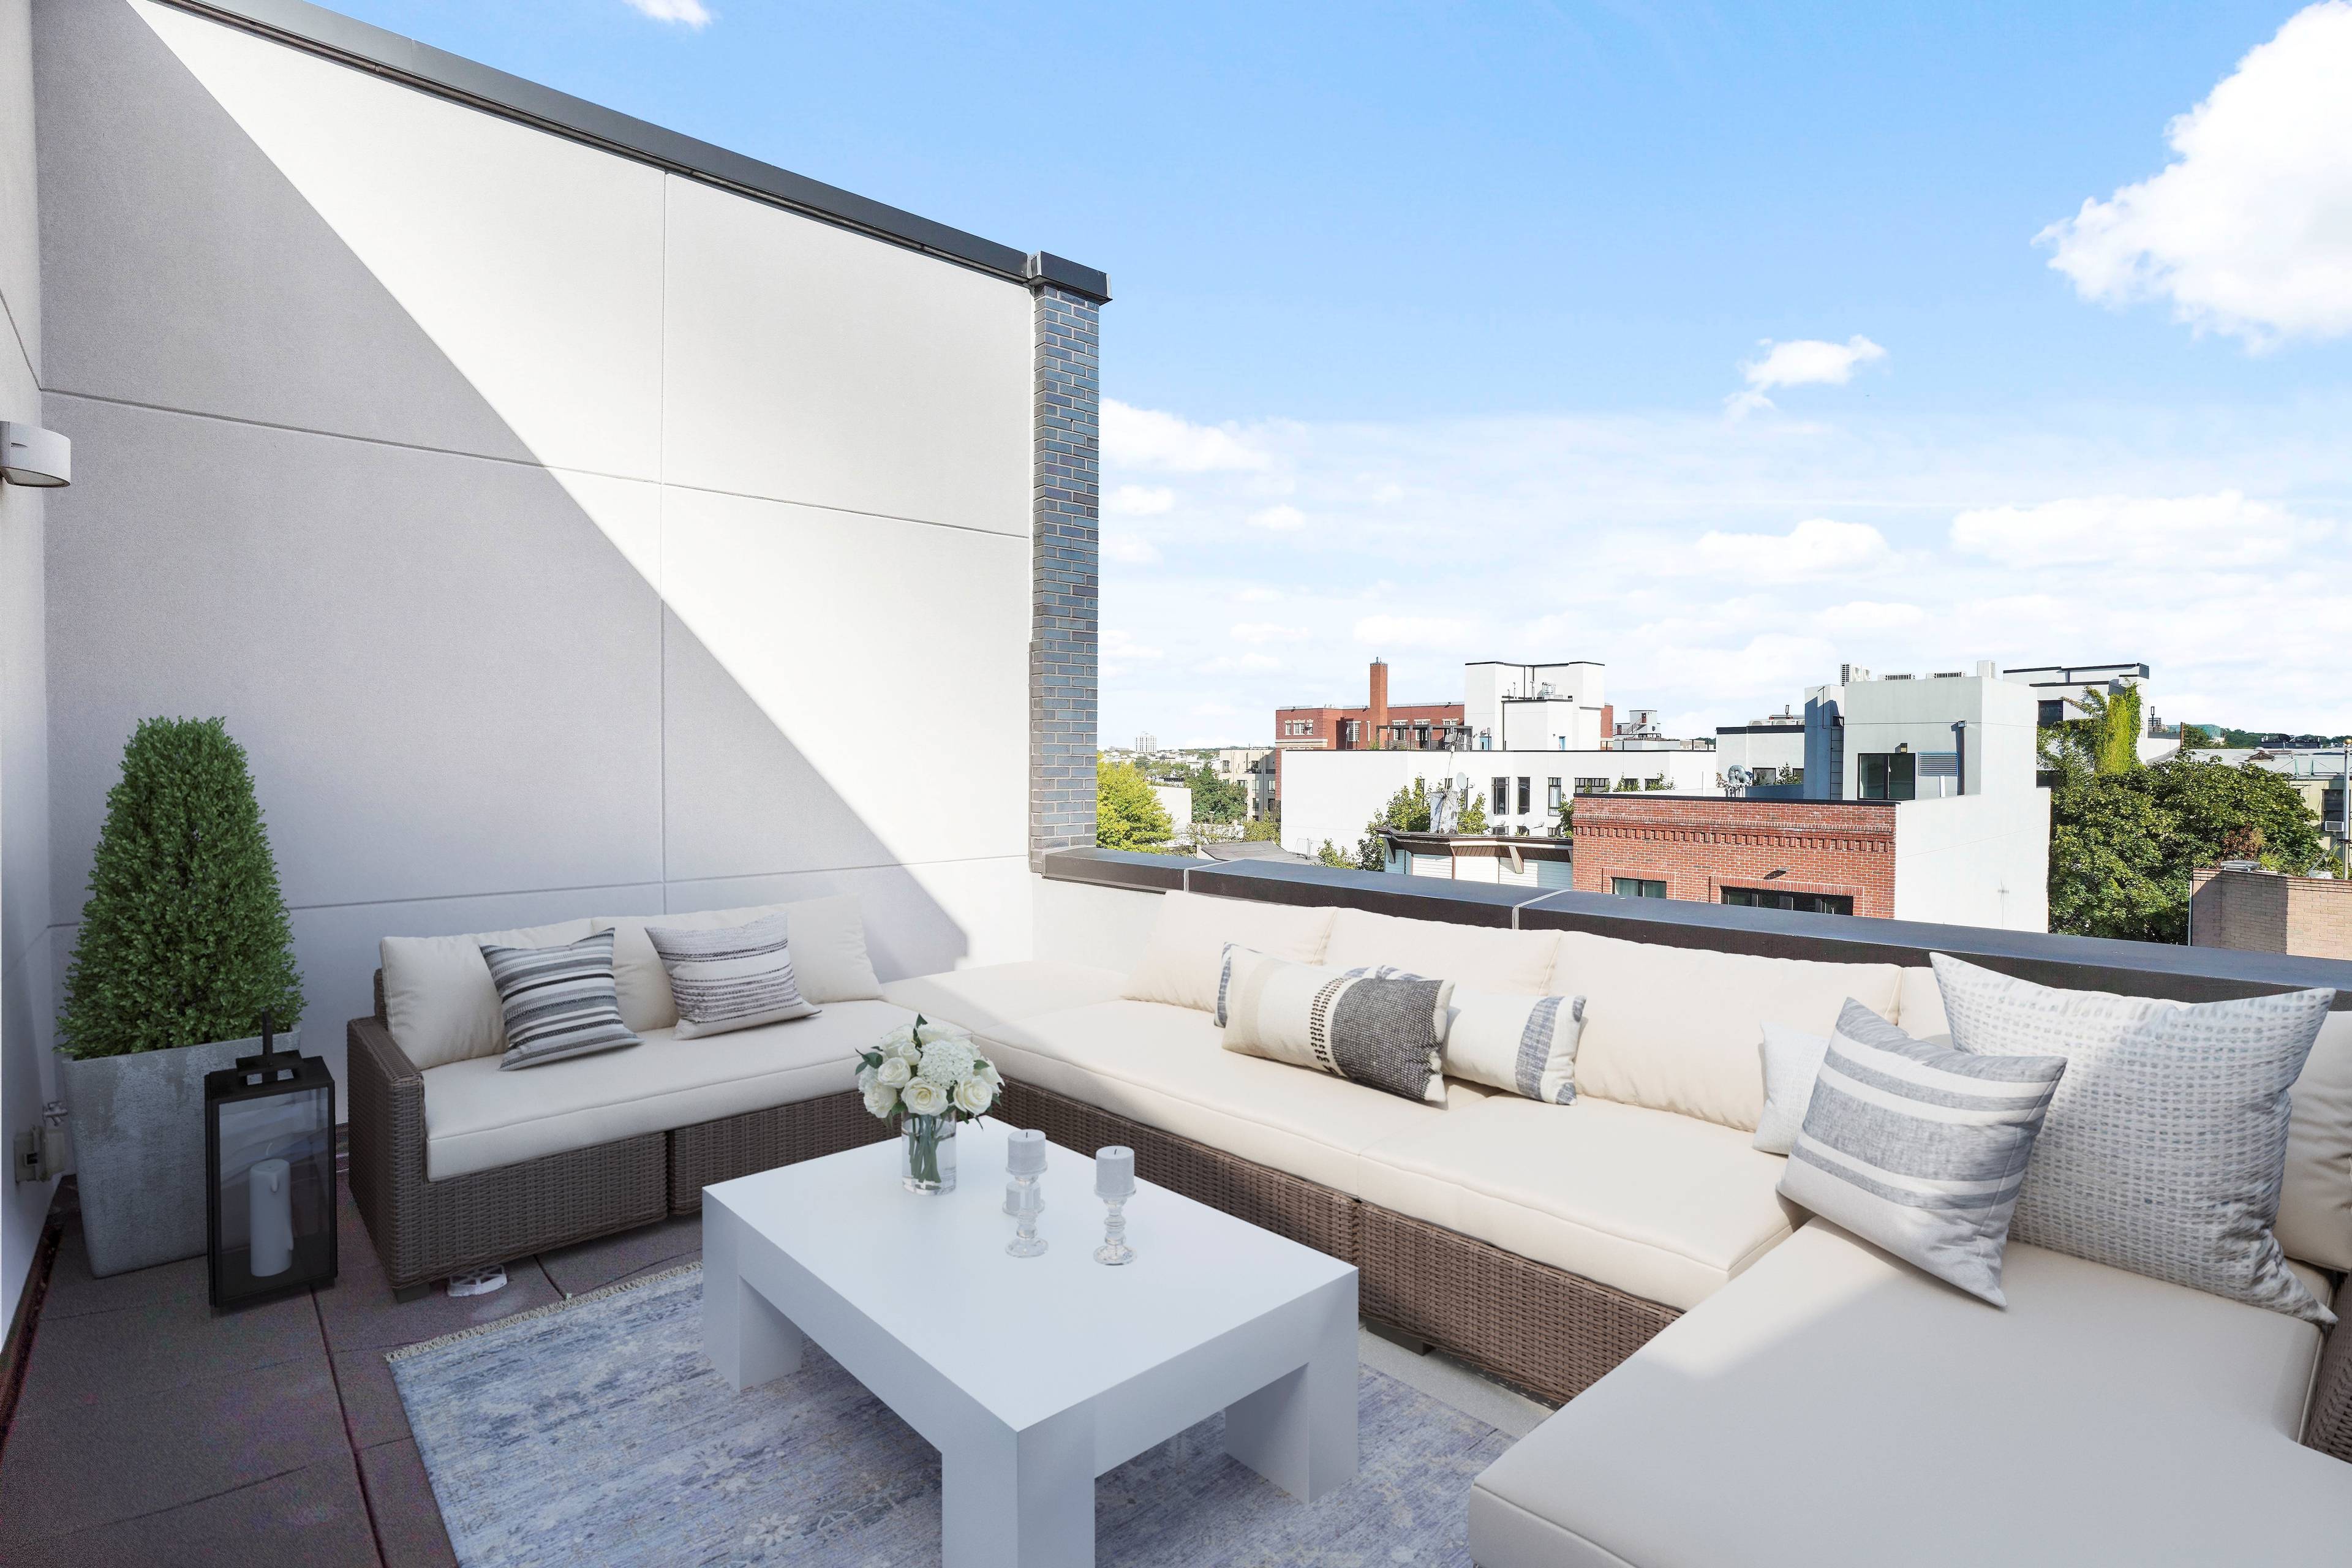 Introducing the epitome of modern urban living at this new 20 unit condo project in the heart of Bushwick a vibrant neighborhood that's been steadily capturing hearts with its dynamic ...